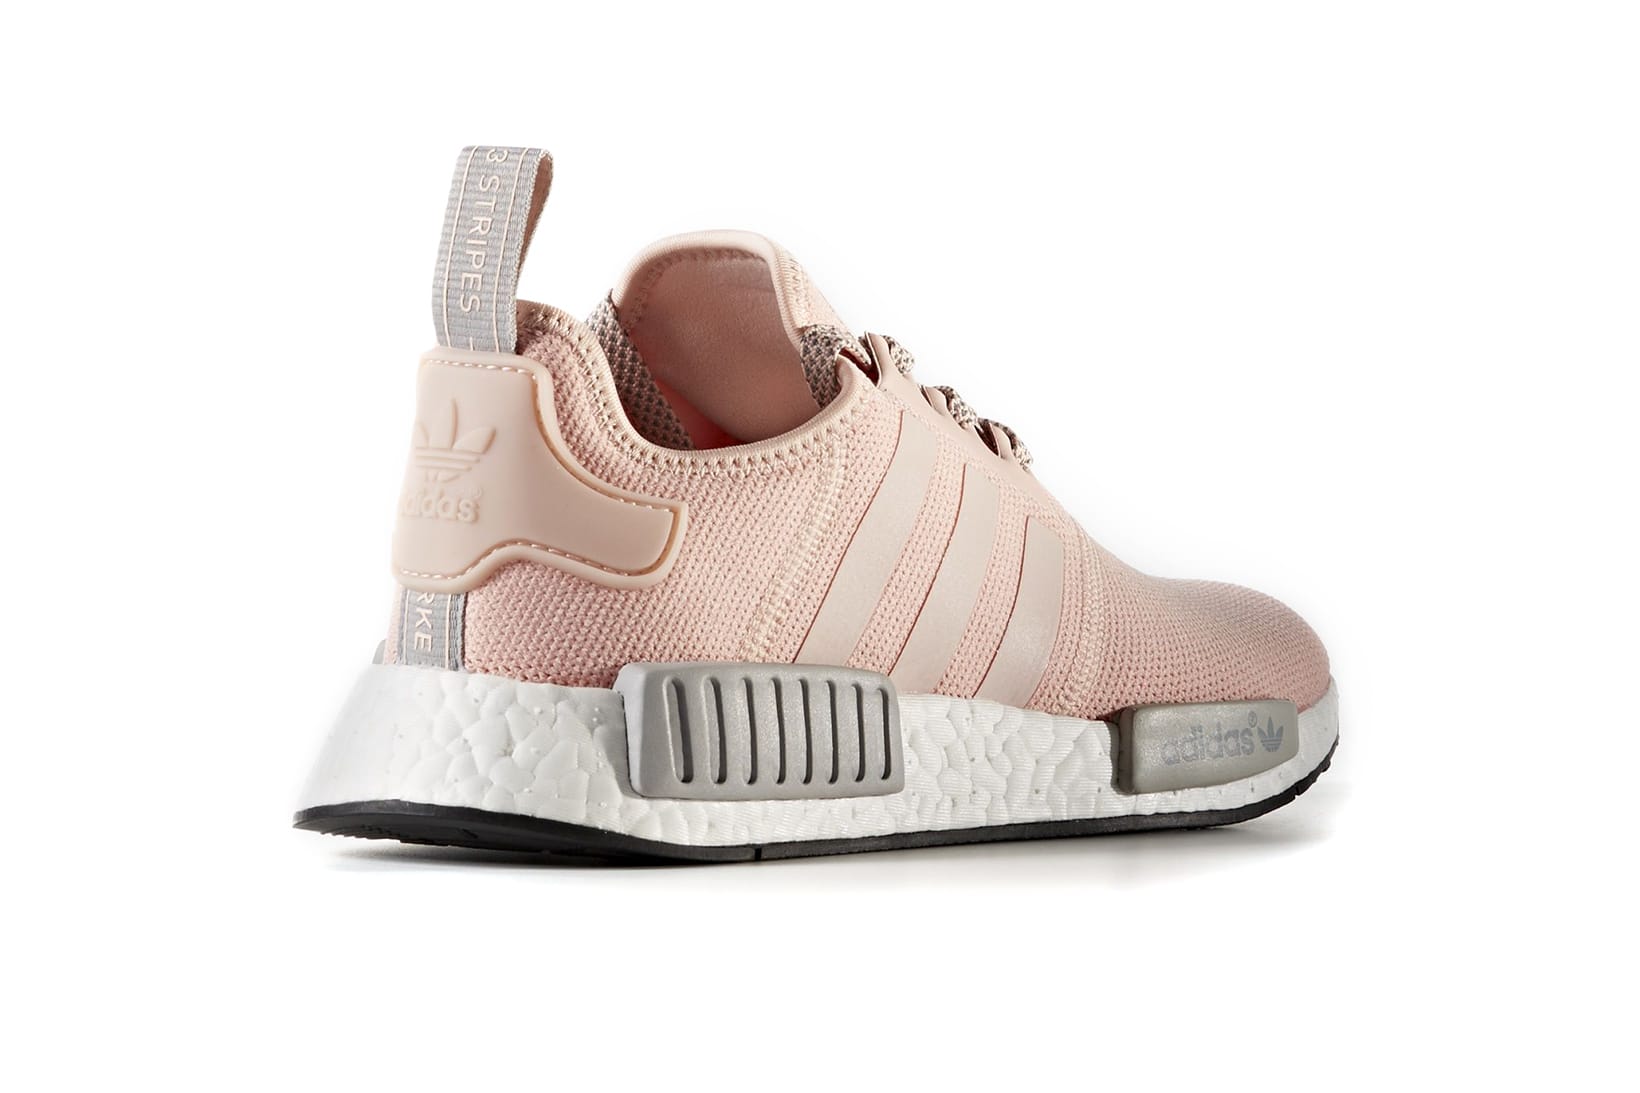 nmds pink and grey